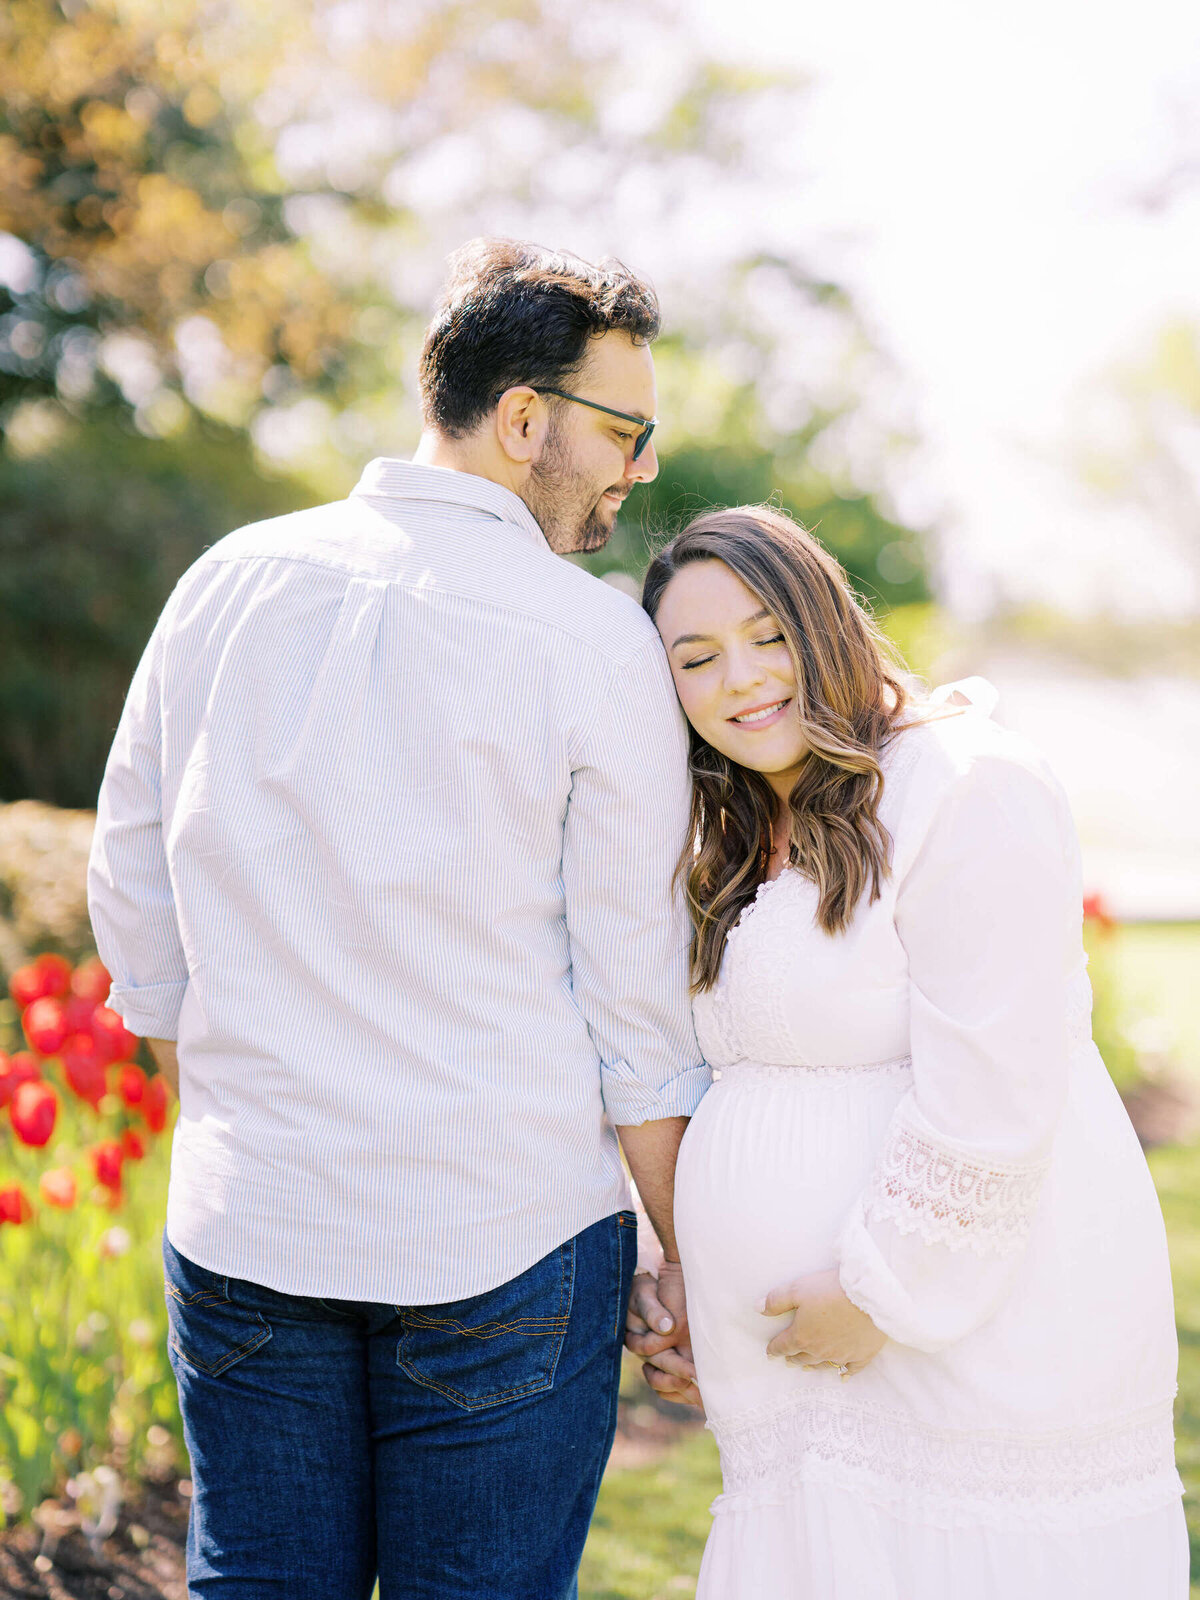 15 Dallas Arboretum Maternity Family Session Kate Panza Photography Kim and Nic